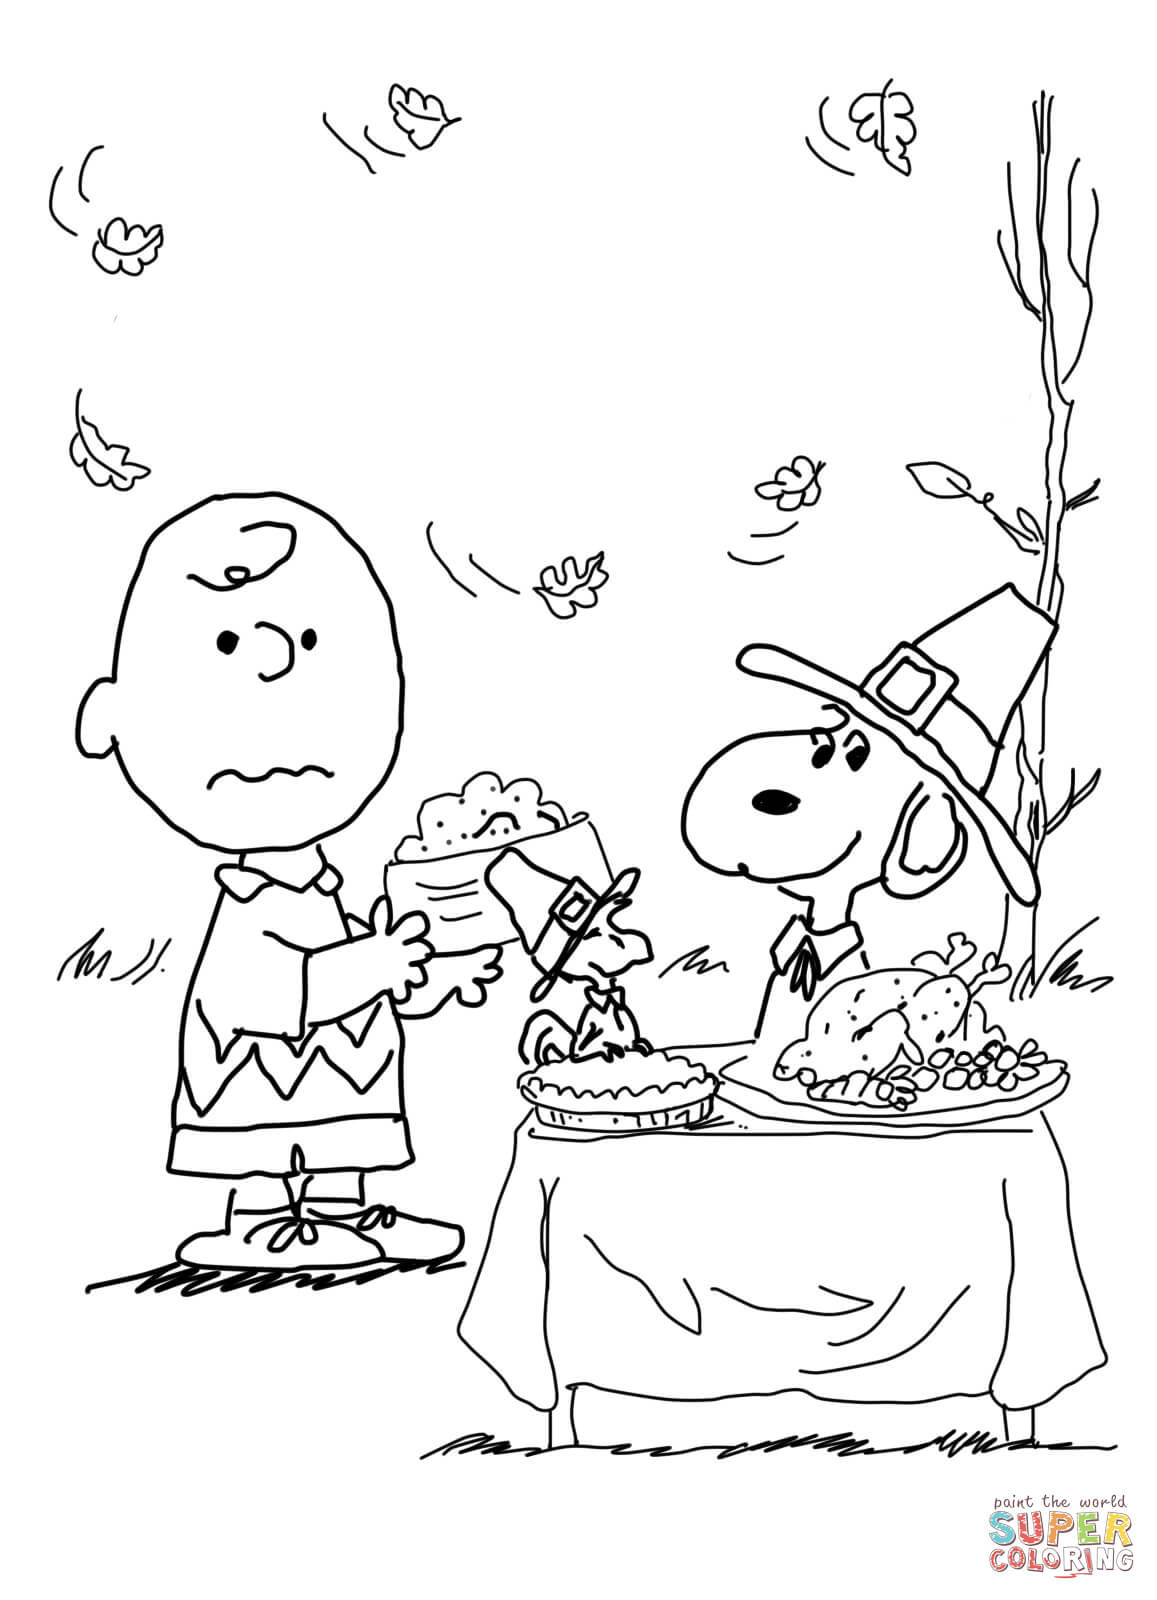 Free Thanksgiving Coloring Pages To Print
 Charlie Brown Thanksgiving coloring page